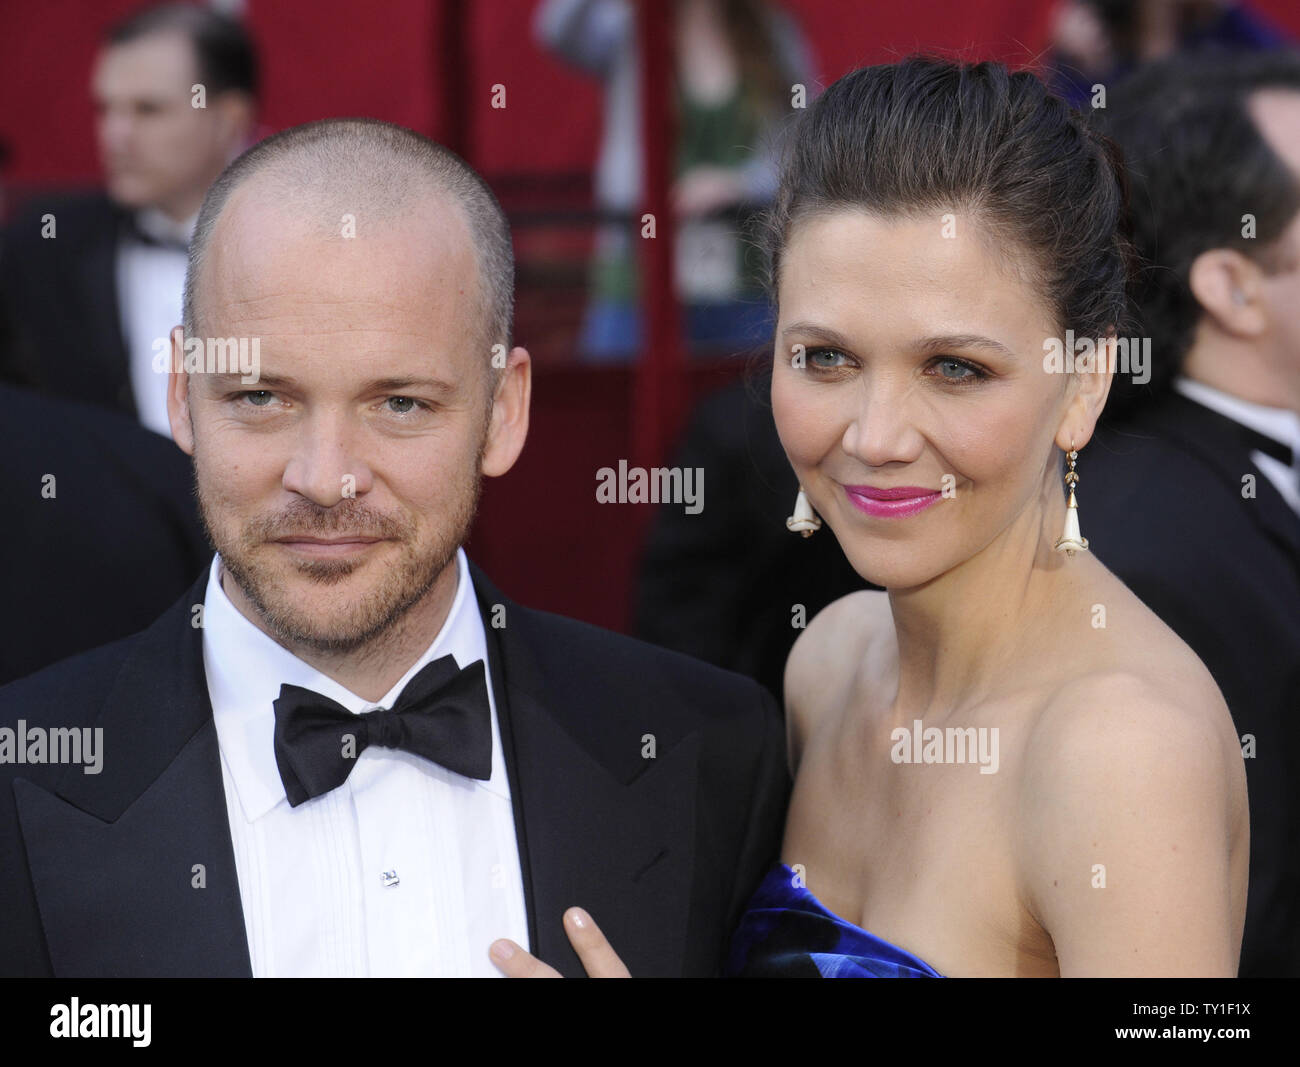 Nominee for Best Actress in a Supporting Role Maggie Gyllenhaal and her husband Peter Sarsgaard arrive on the red carpet at the 82nd Academy Awards in Hollywood on March 7, 2010.   UPI/Phil McCarten Stock Photo